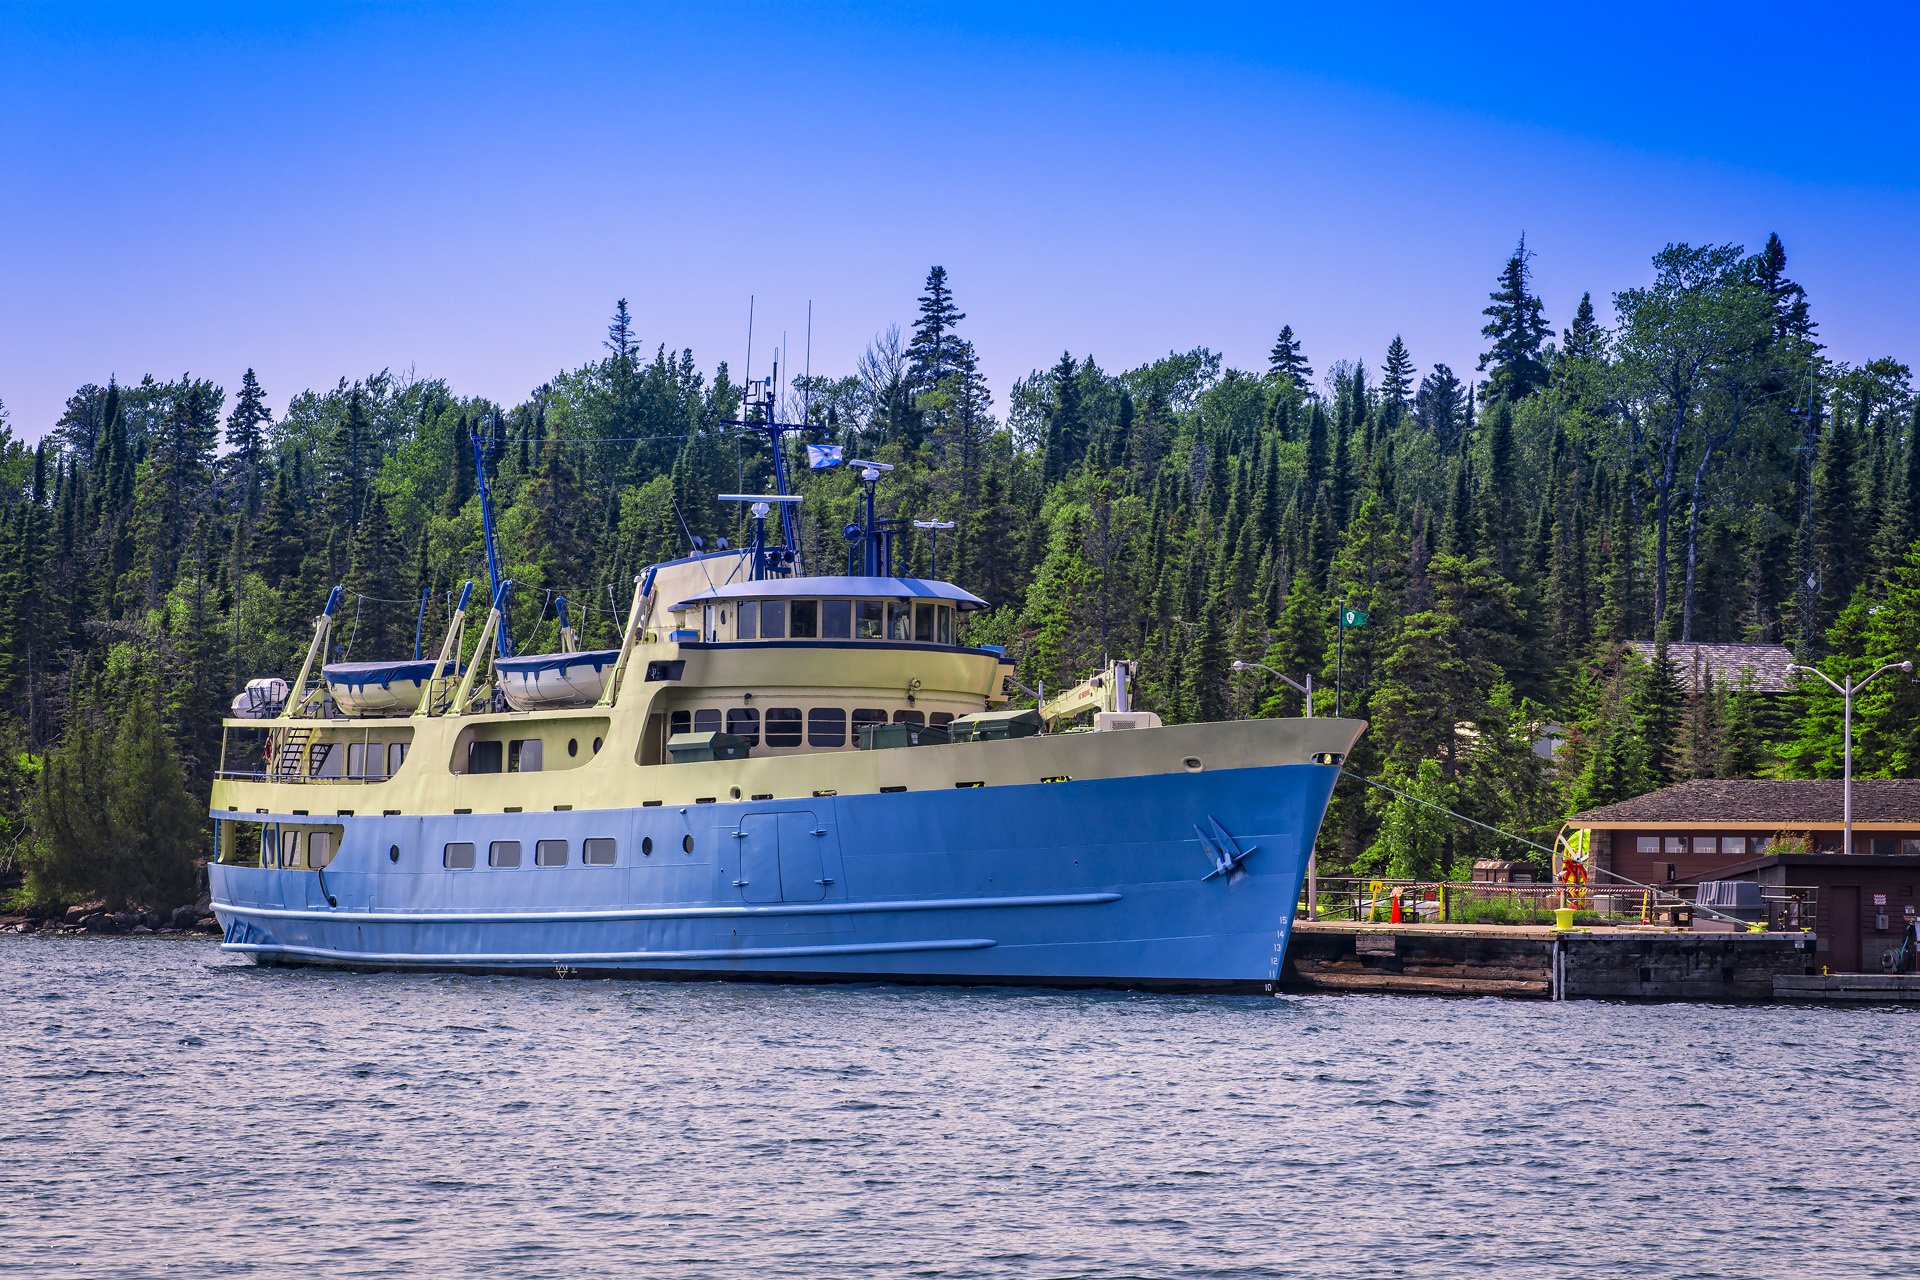 The National Park Service Vessel Ranger III at the dock at Rock Harbor in Isle Royale National Park, Lake Superior, Michigan, USA.